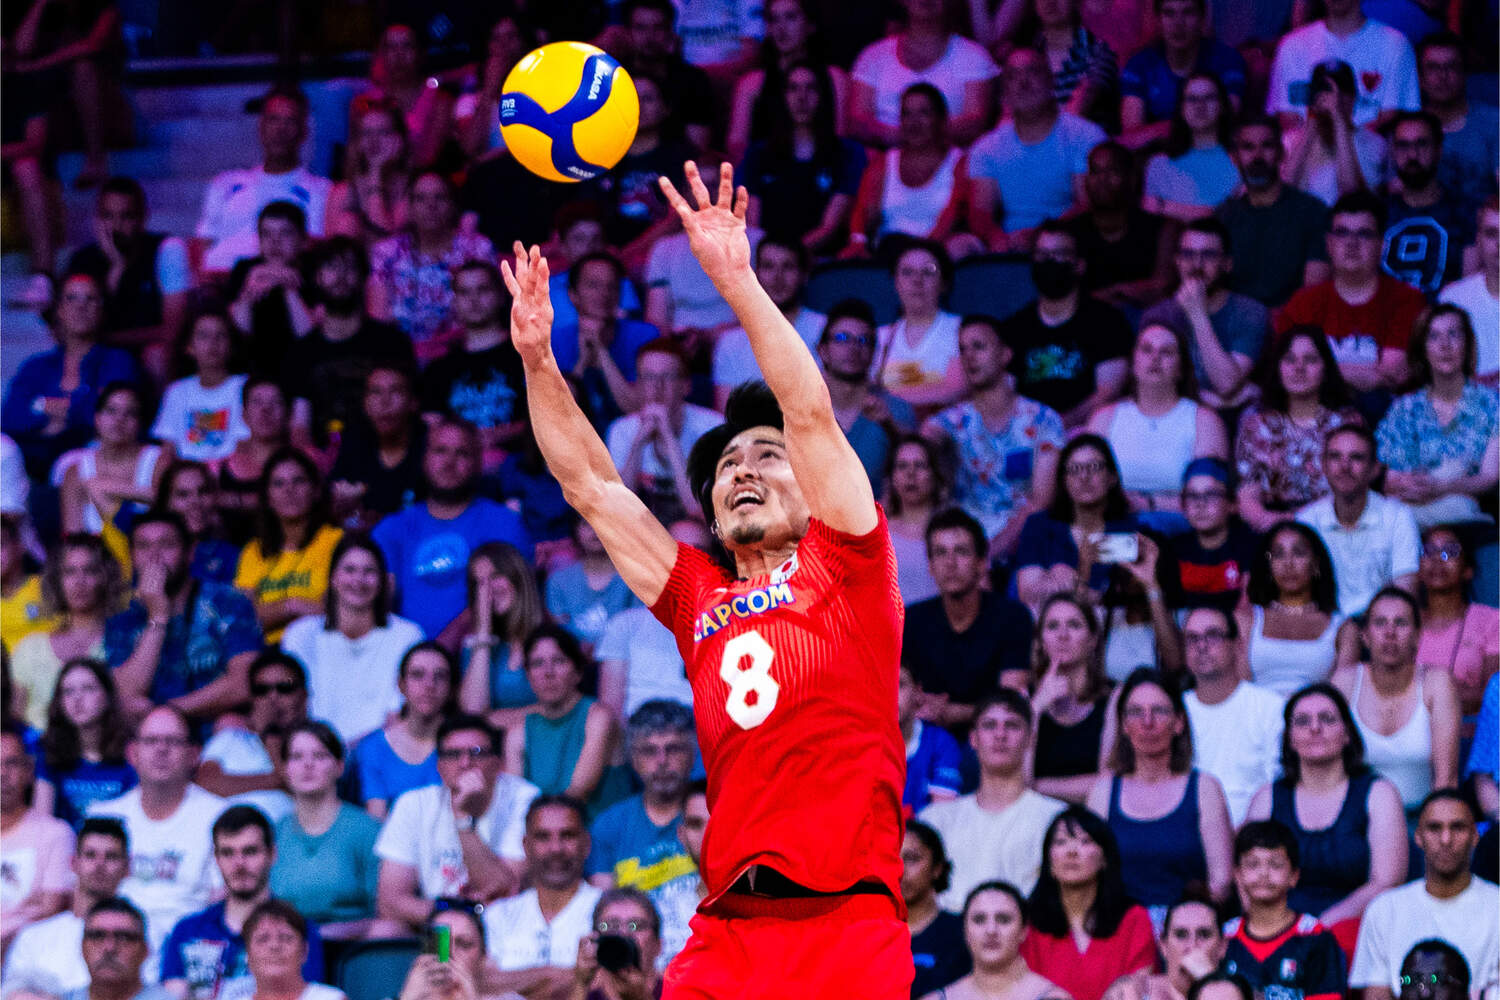 WorldofVolley :: Which nations are favorites to win this year's FIVB Men's World  Championships? - WorldOfVolley